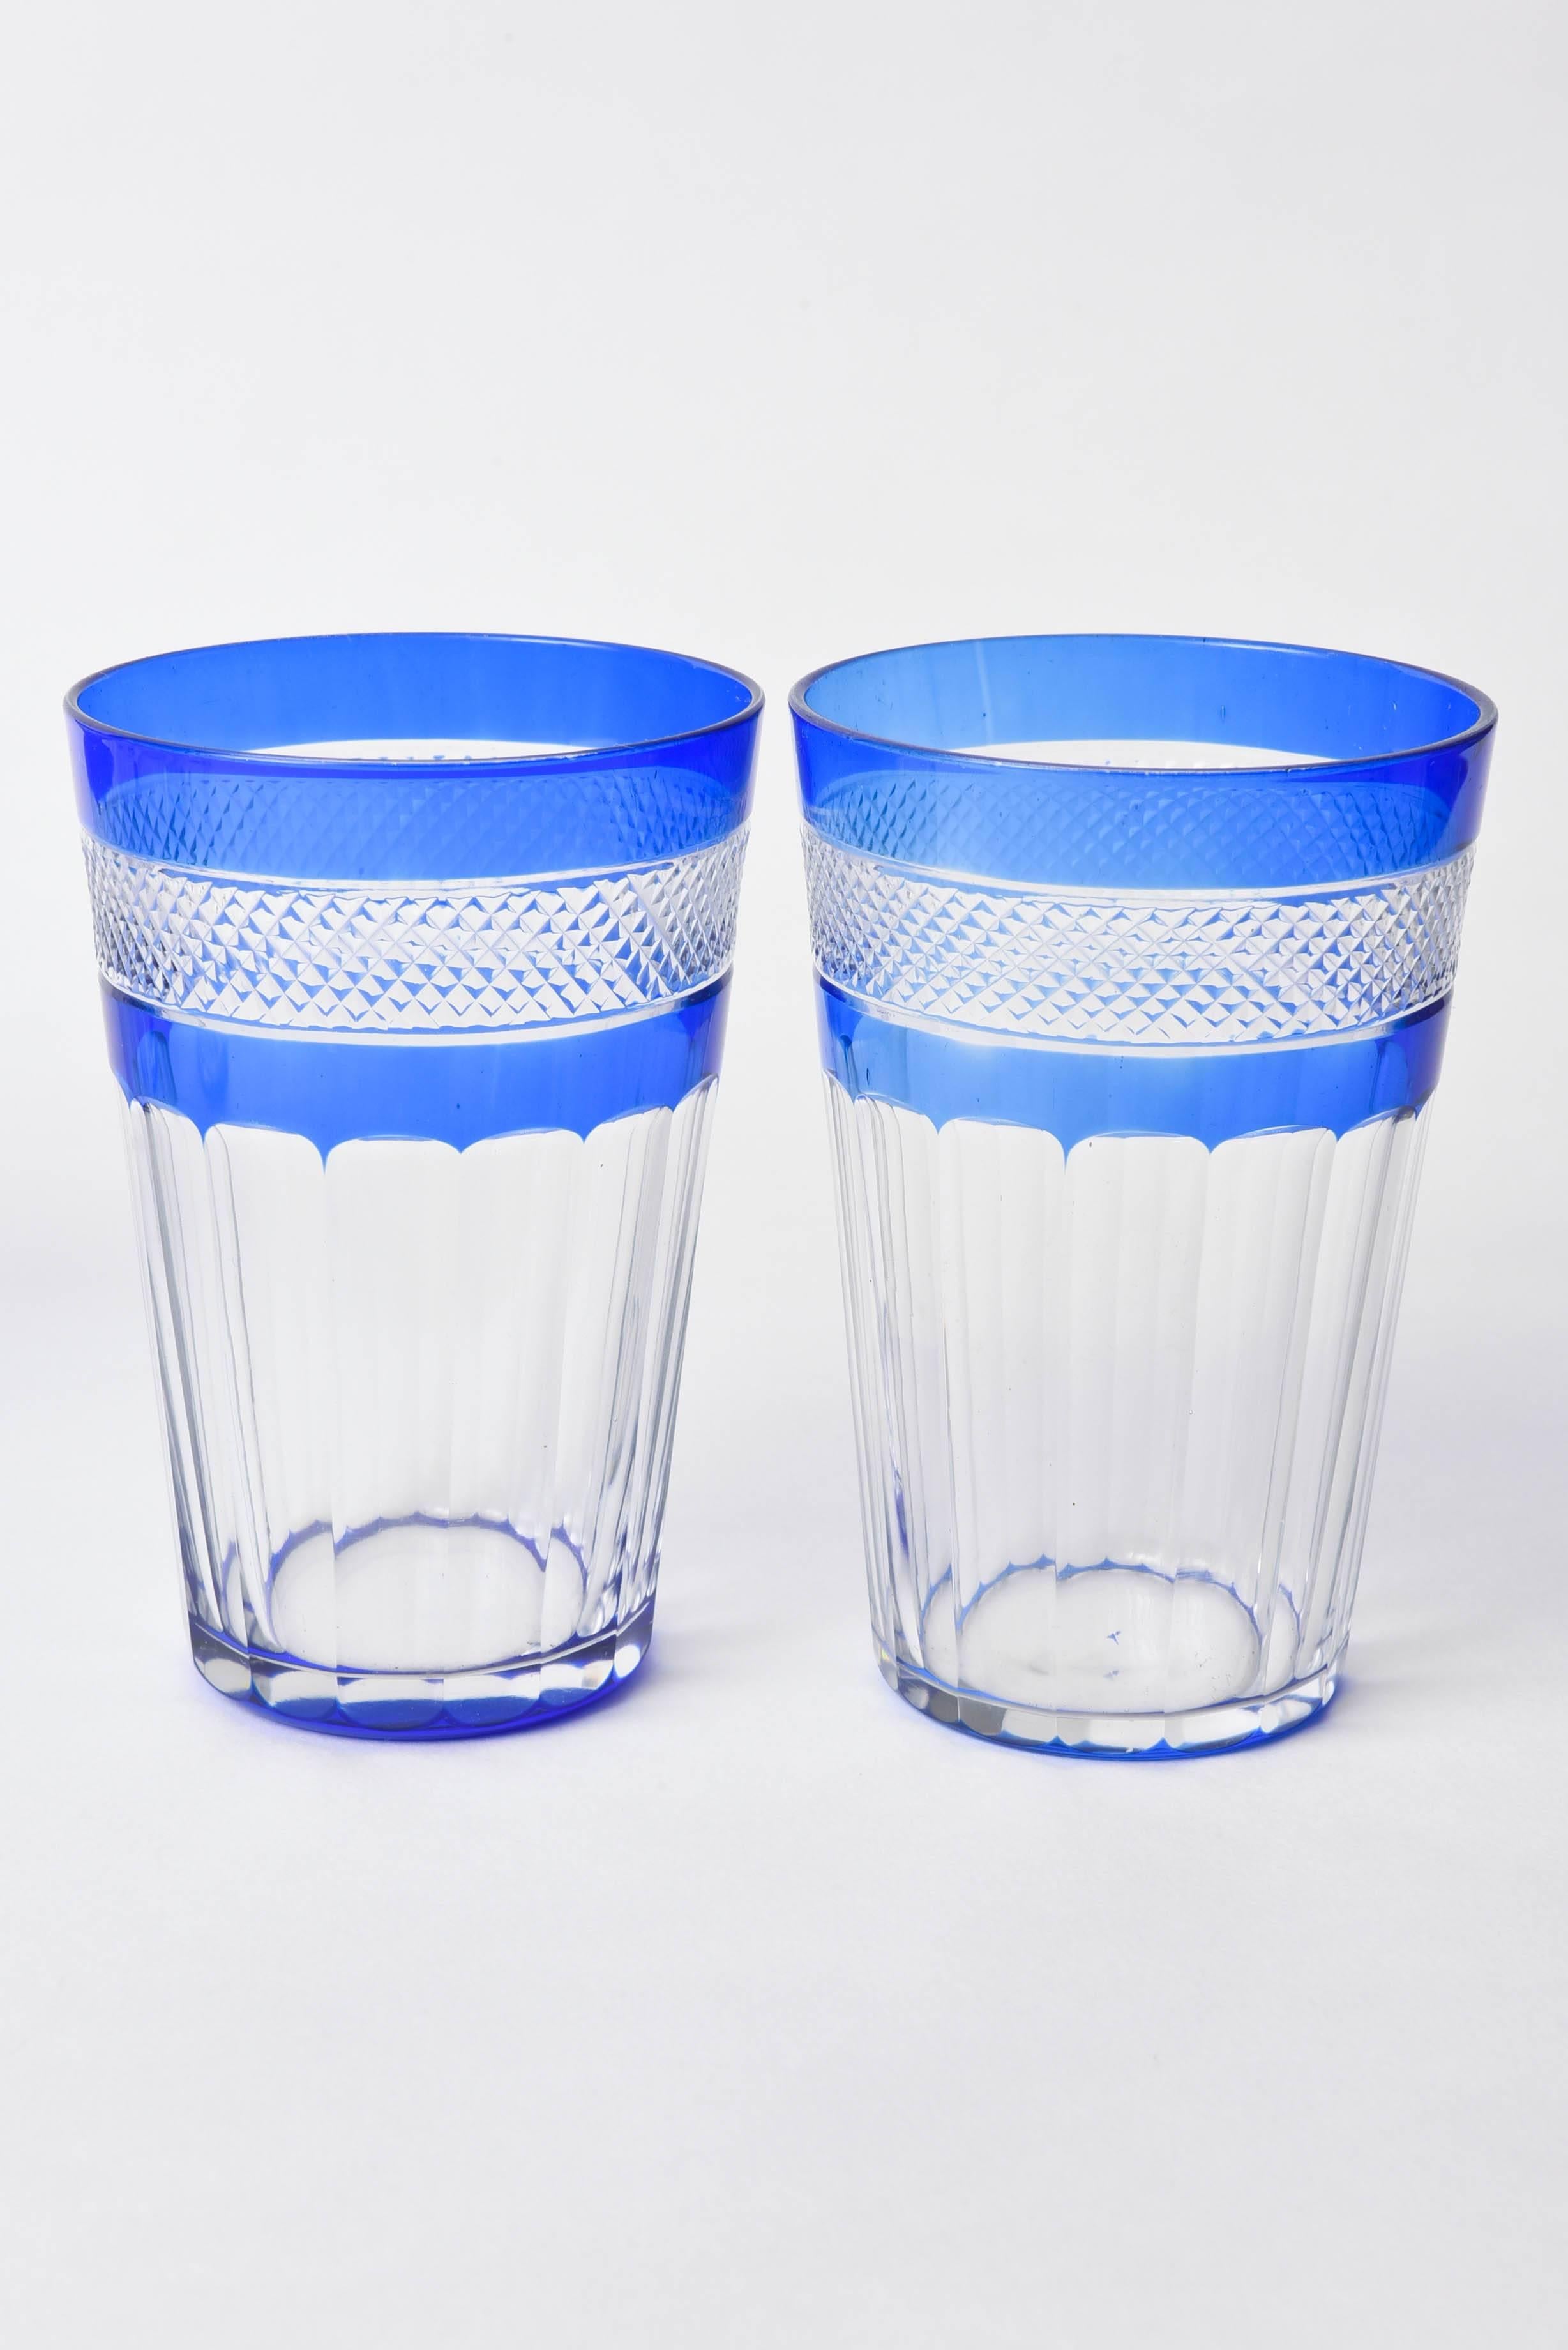 A great set with super cobalt blue color. Please note the extra cased blue glass even on the base of these tumblers. Elongated thumbprint and cross diamond hatch pattern enhance these practical bar or water glasses. While not signed as they are